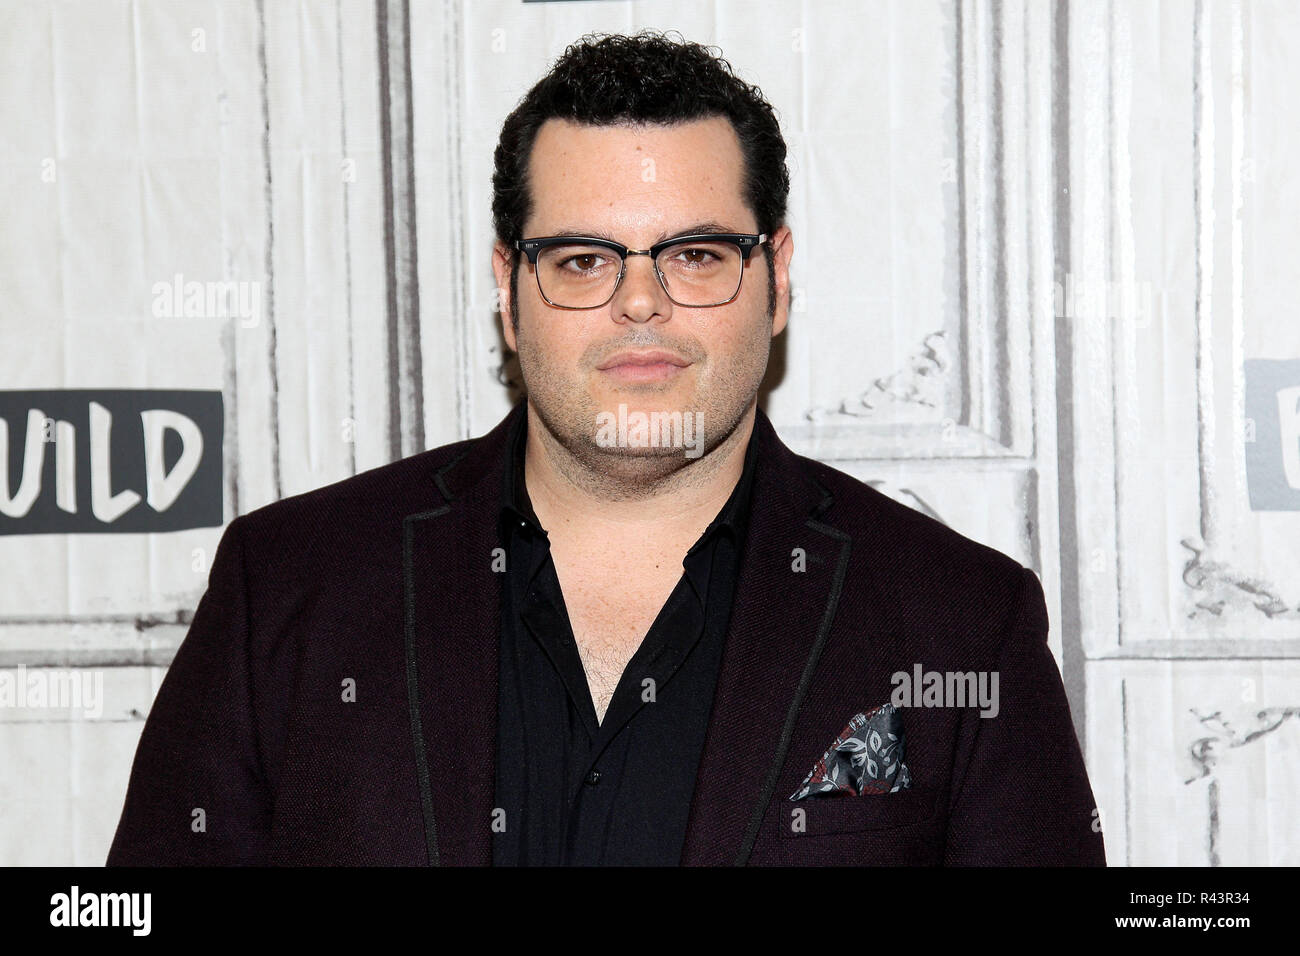 NEW YORK, NY - NOVEMBER 06:  Build presents Josh Gad discussing 'Murder On The Orient Express' at Build Studio on November 6, 2017 in New York City.  (Photo by Steve Mack/S.D. Mack Pictures) Stock Photo